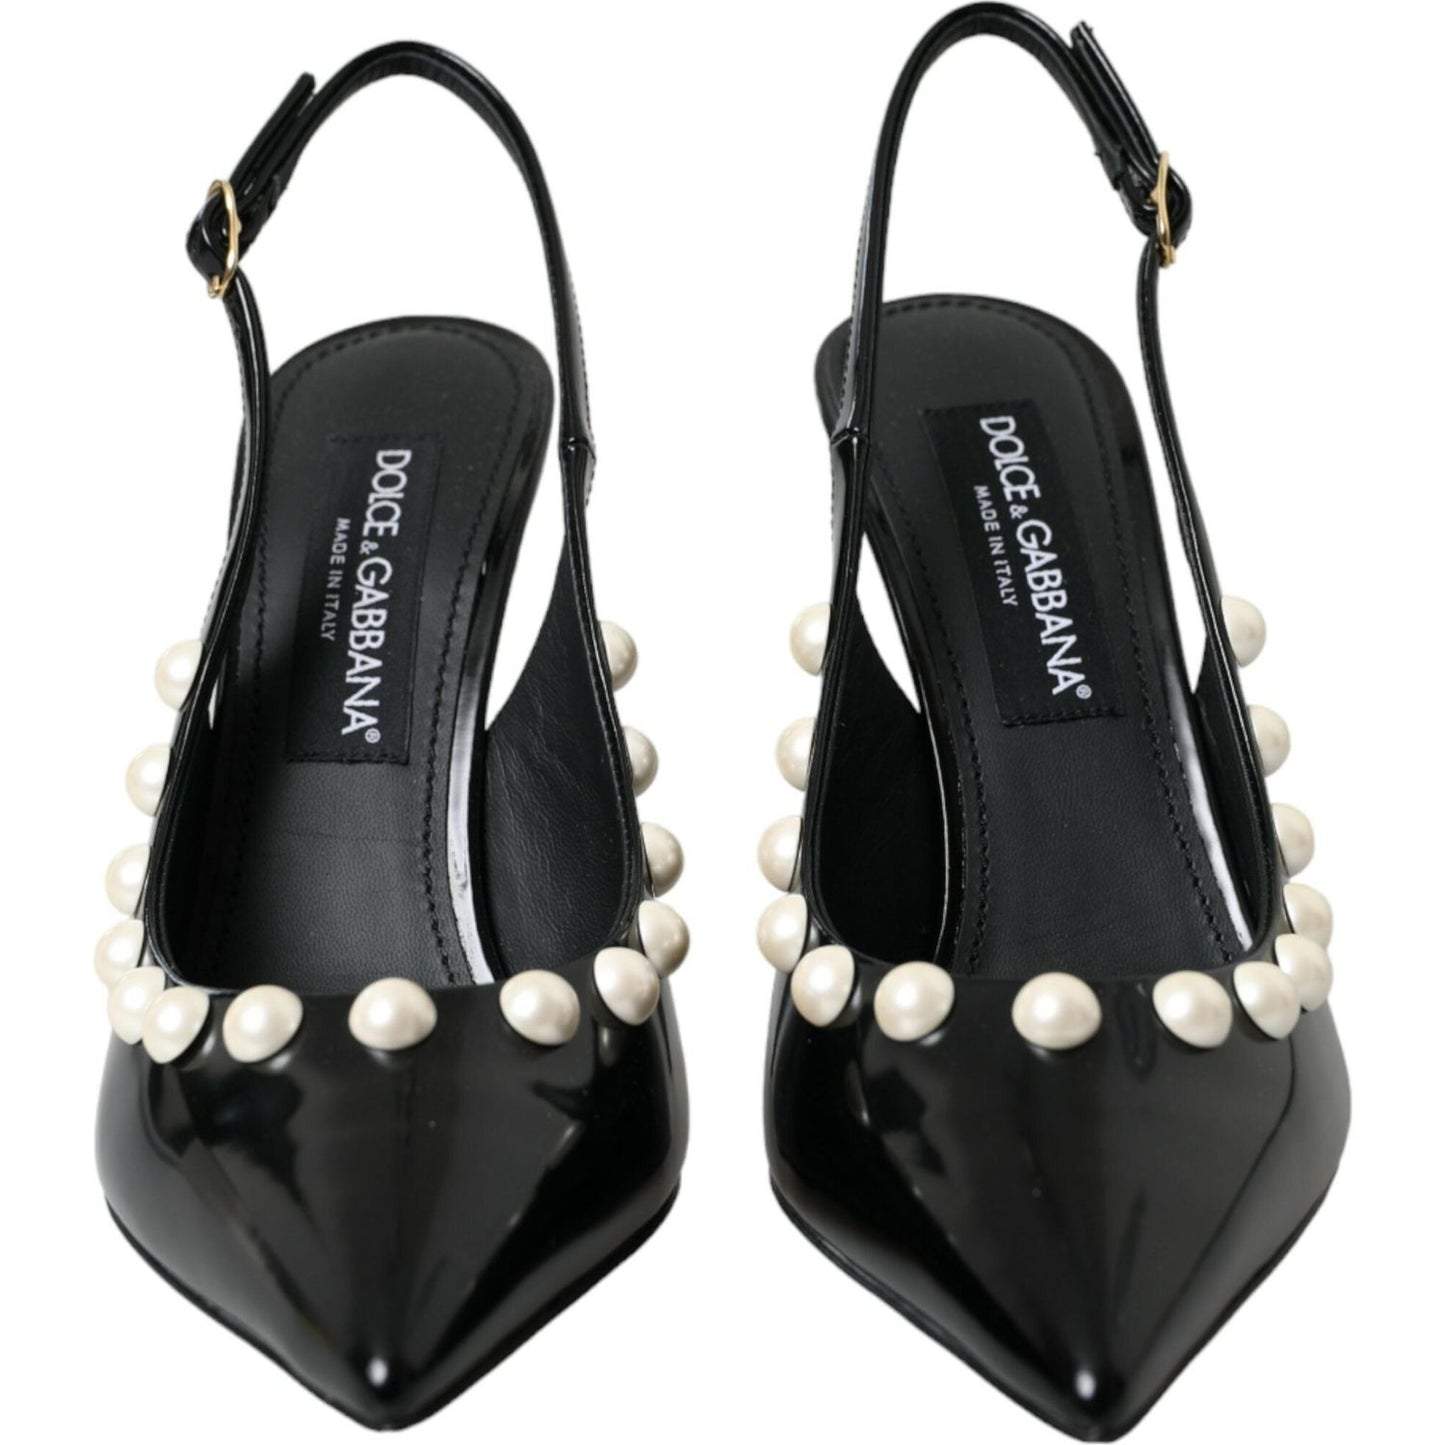 Dolce & Gabbana Black Leather Faux Pearl Heel Slingback Shoes black-leather-faux-pearl-heel-slingback-shoes